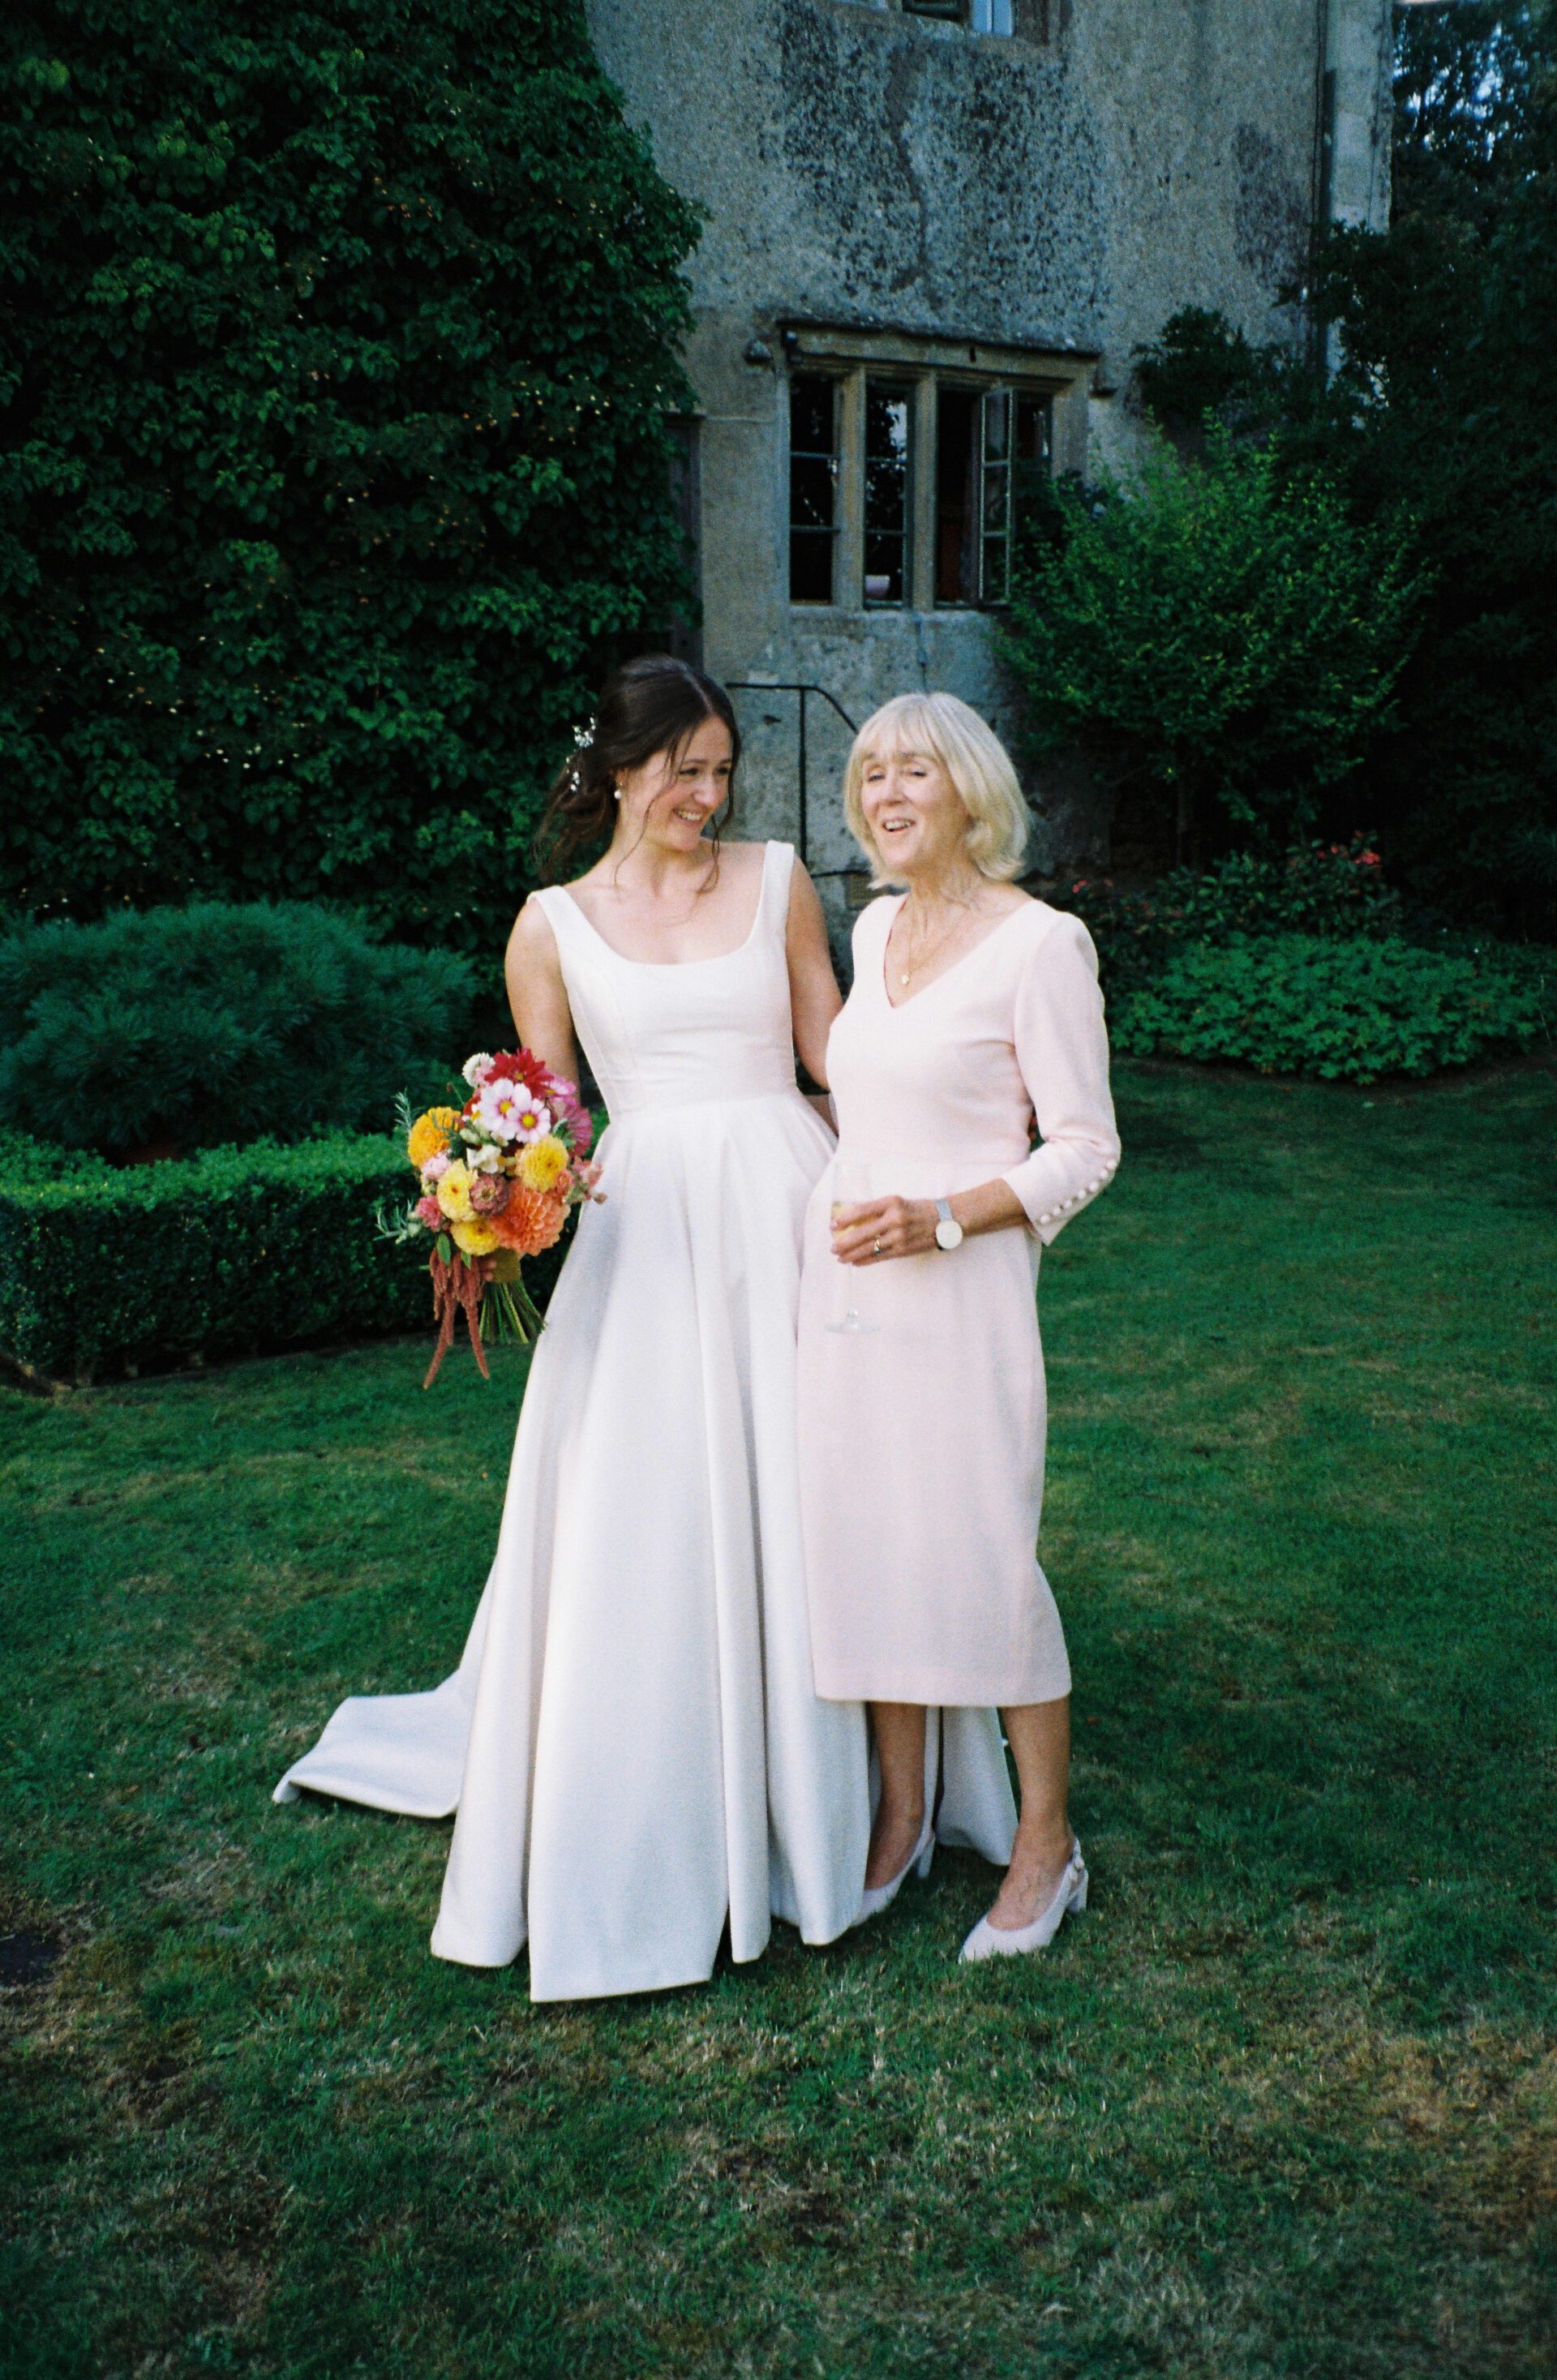 A portrait of the bride and her mother captured on 35mm film